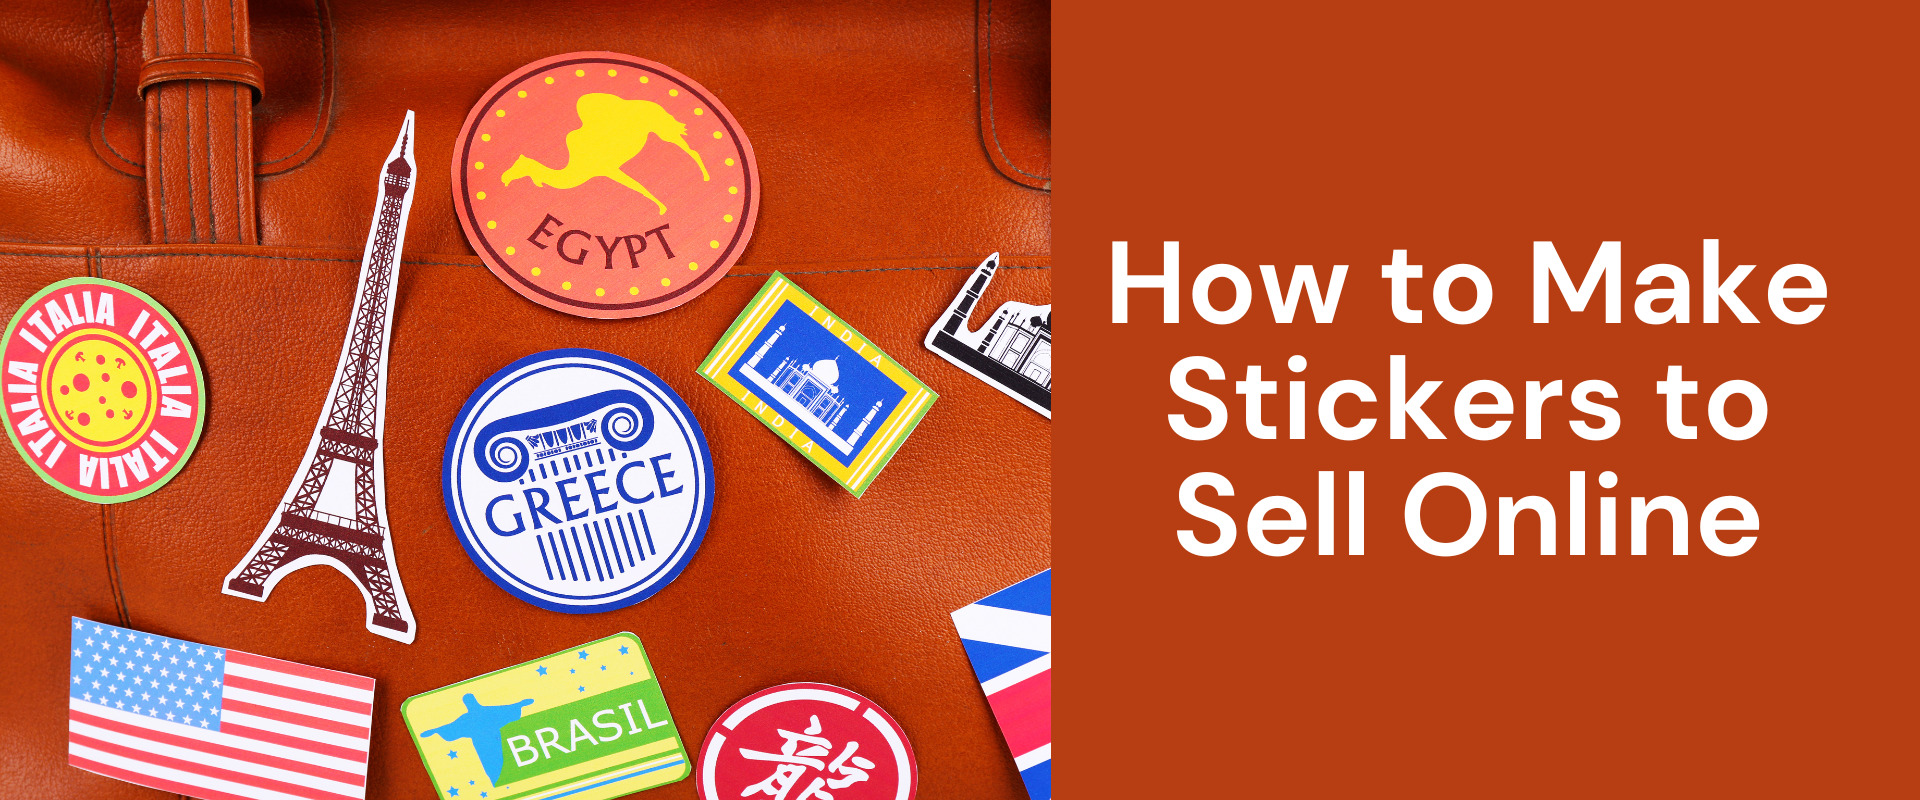 How to Make Stickers to Sell Online